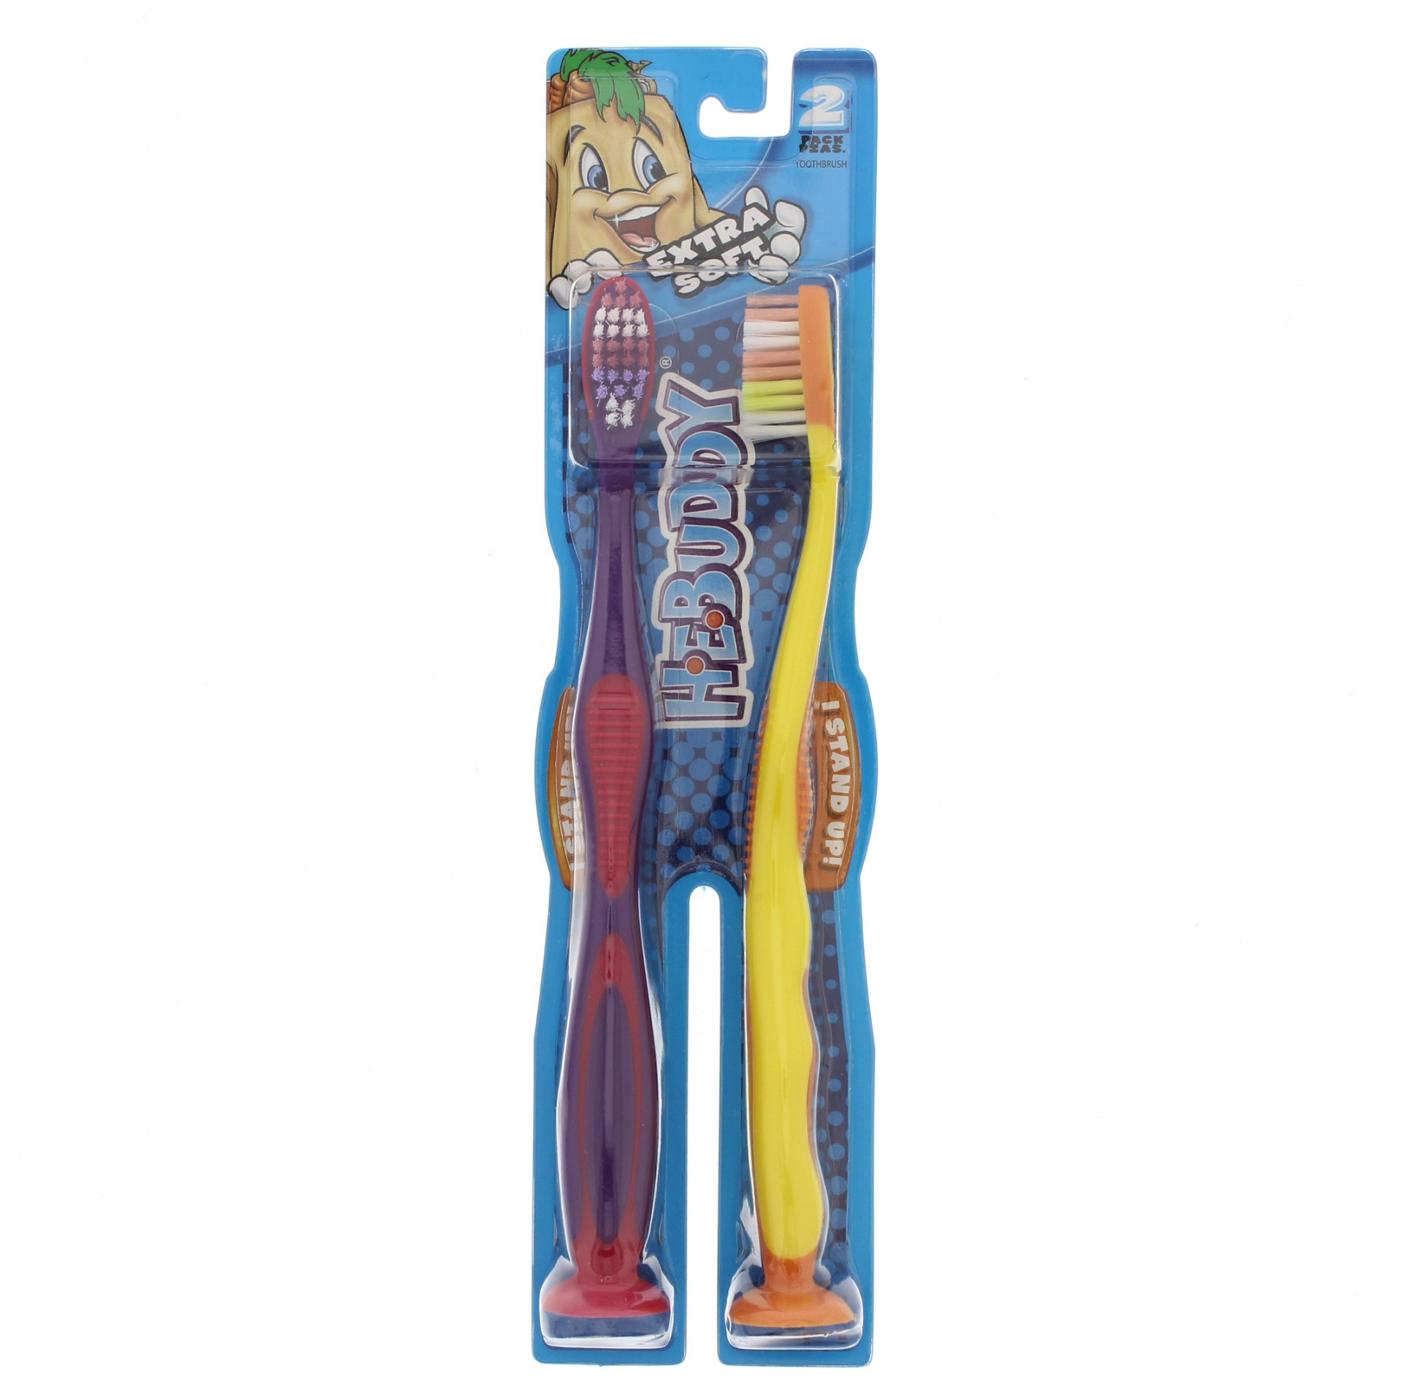 H-E-Buddy Kids Extra Soft Stand Up Toothbrushes - Colors May Vary; image 3 of 4